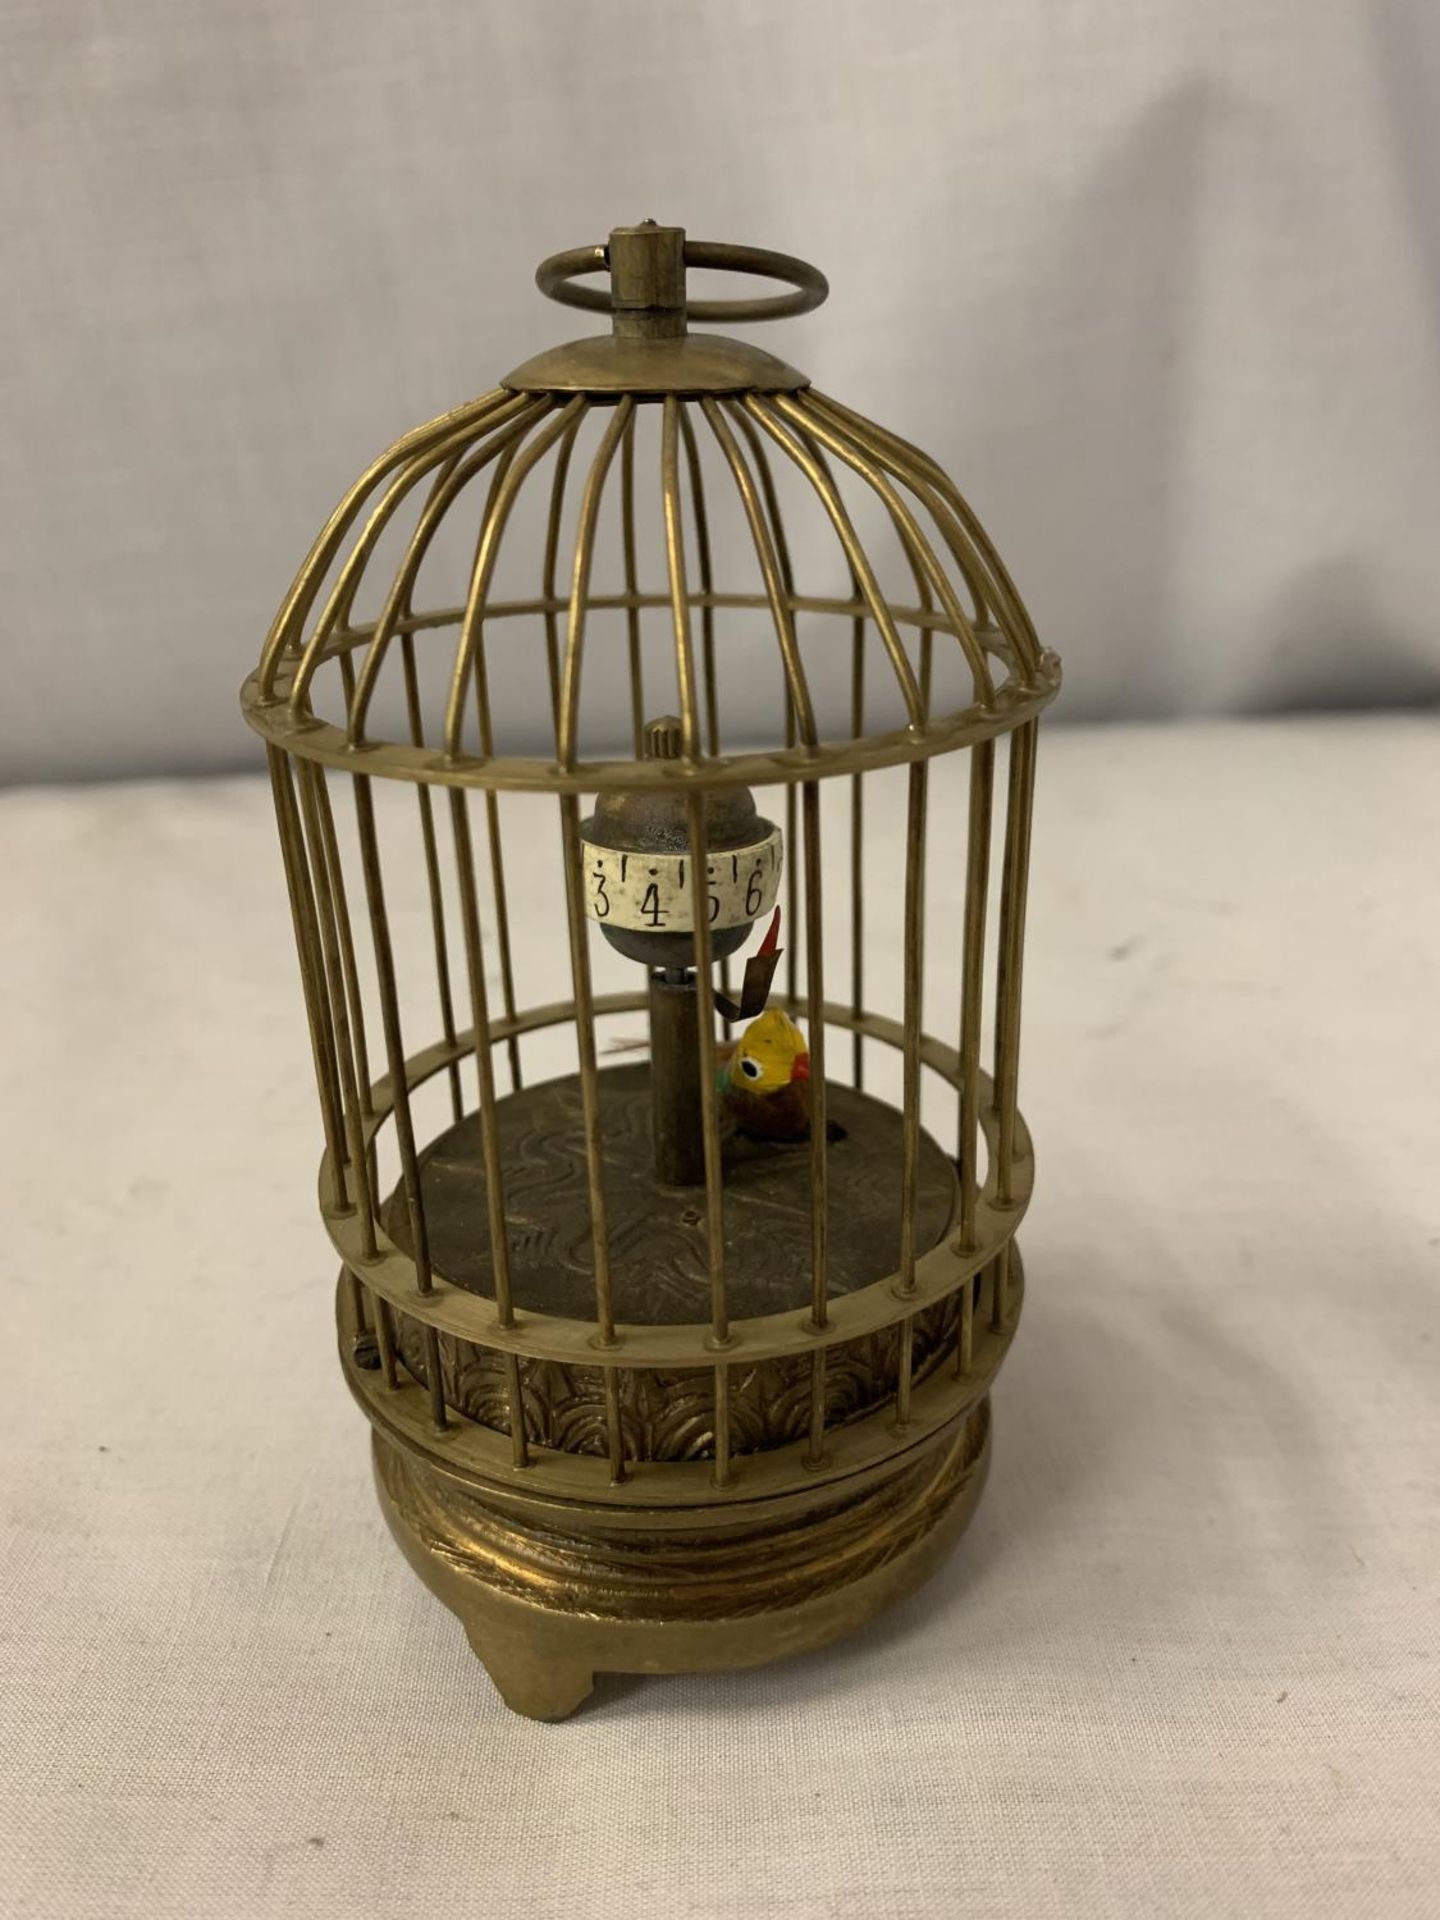 A BIRD CAGE MYSTERY CLOCK - Image 3 of 3